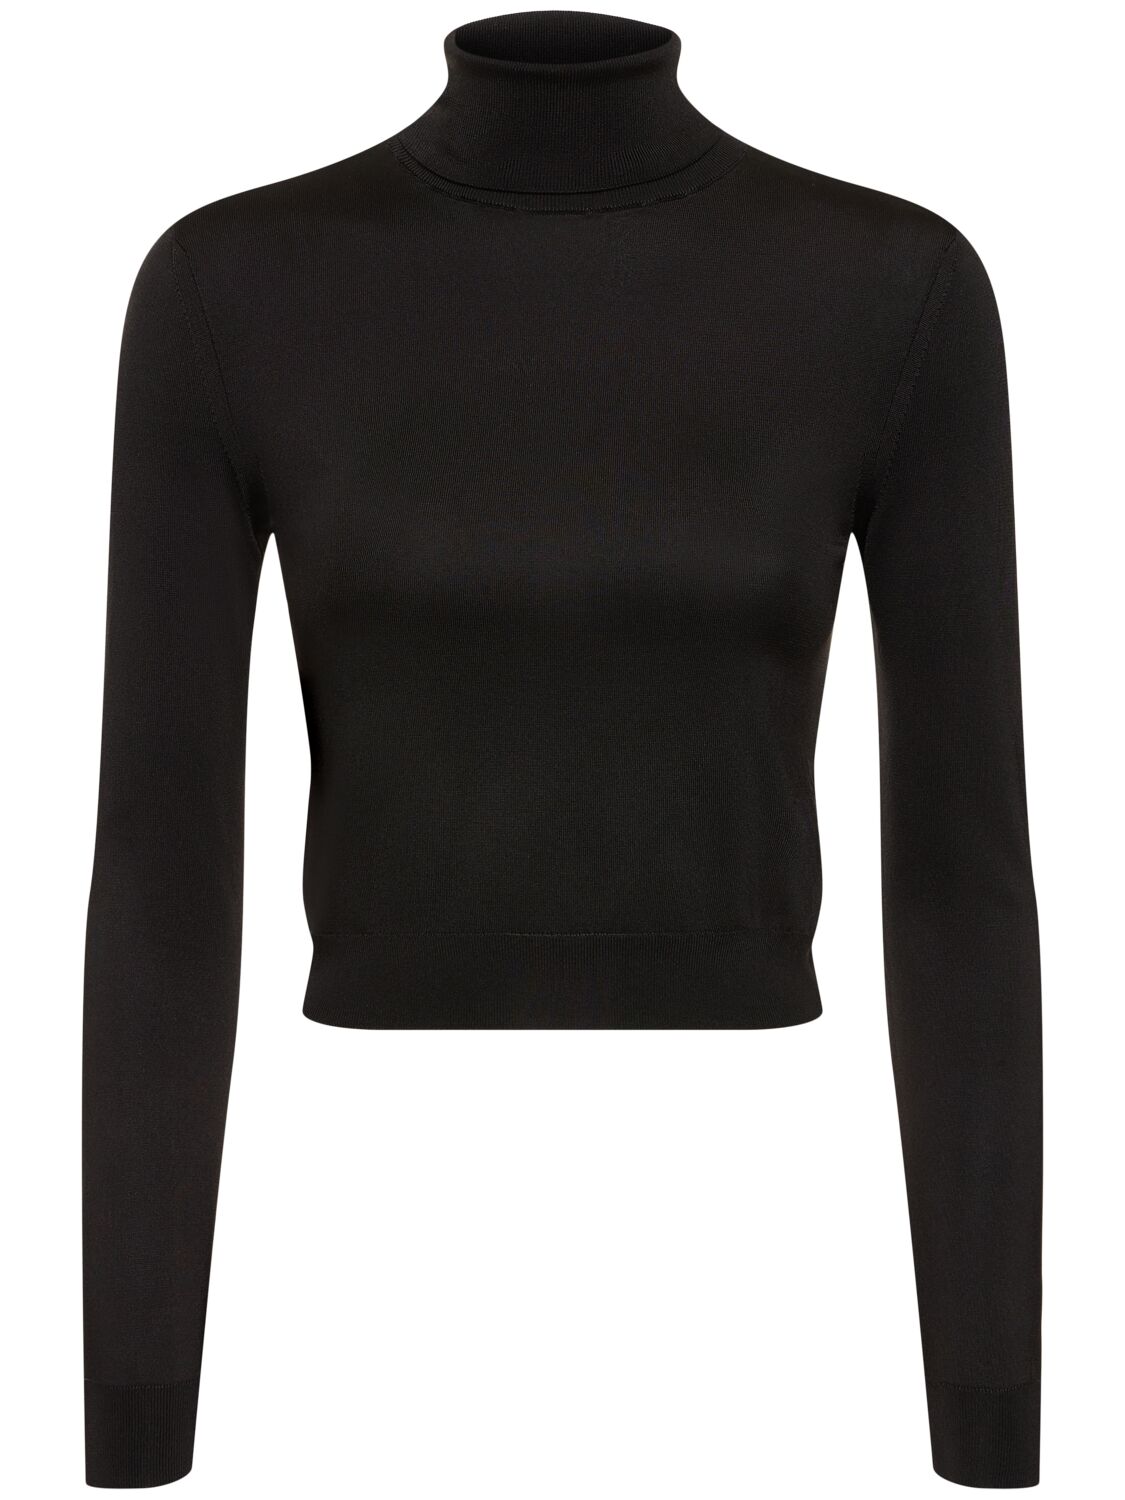 Long Sleeve Cropped Silk Knit Top